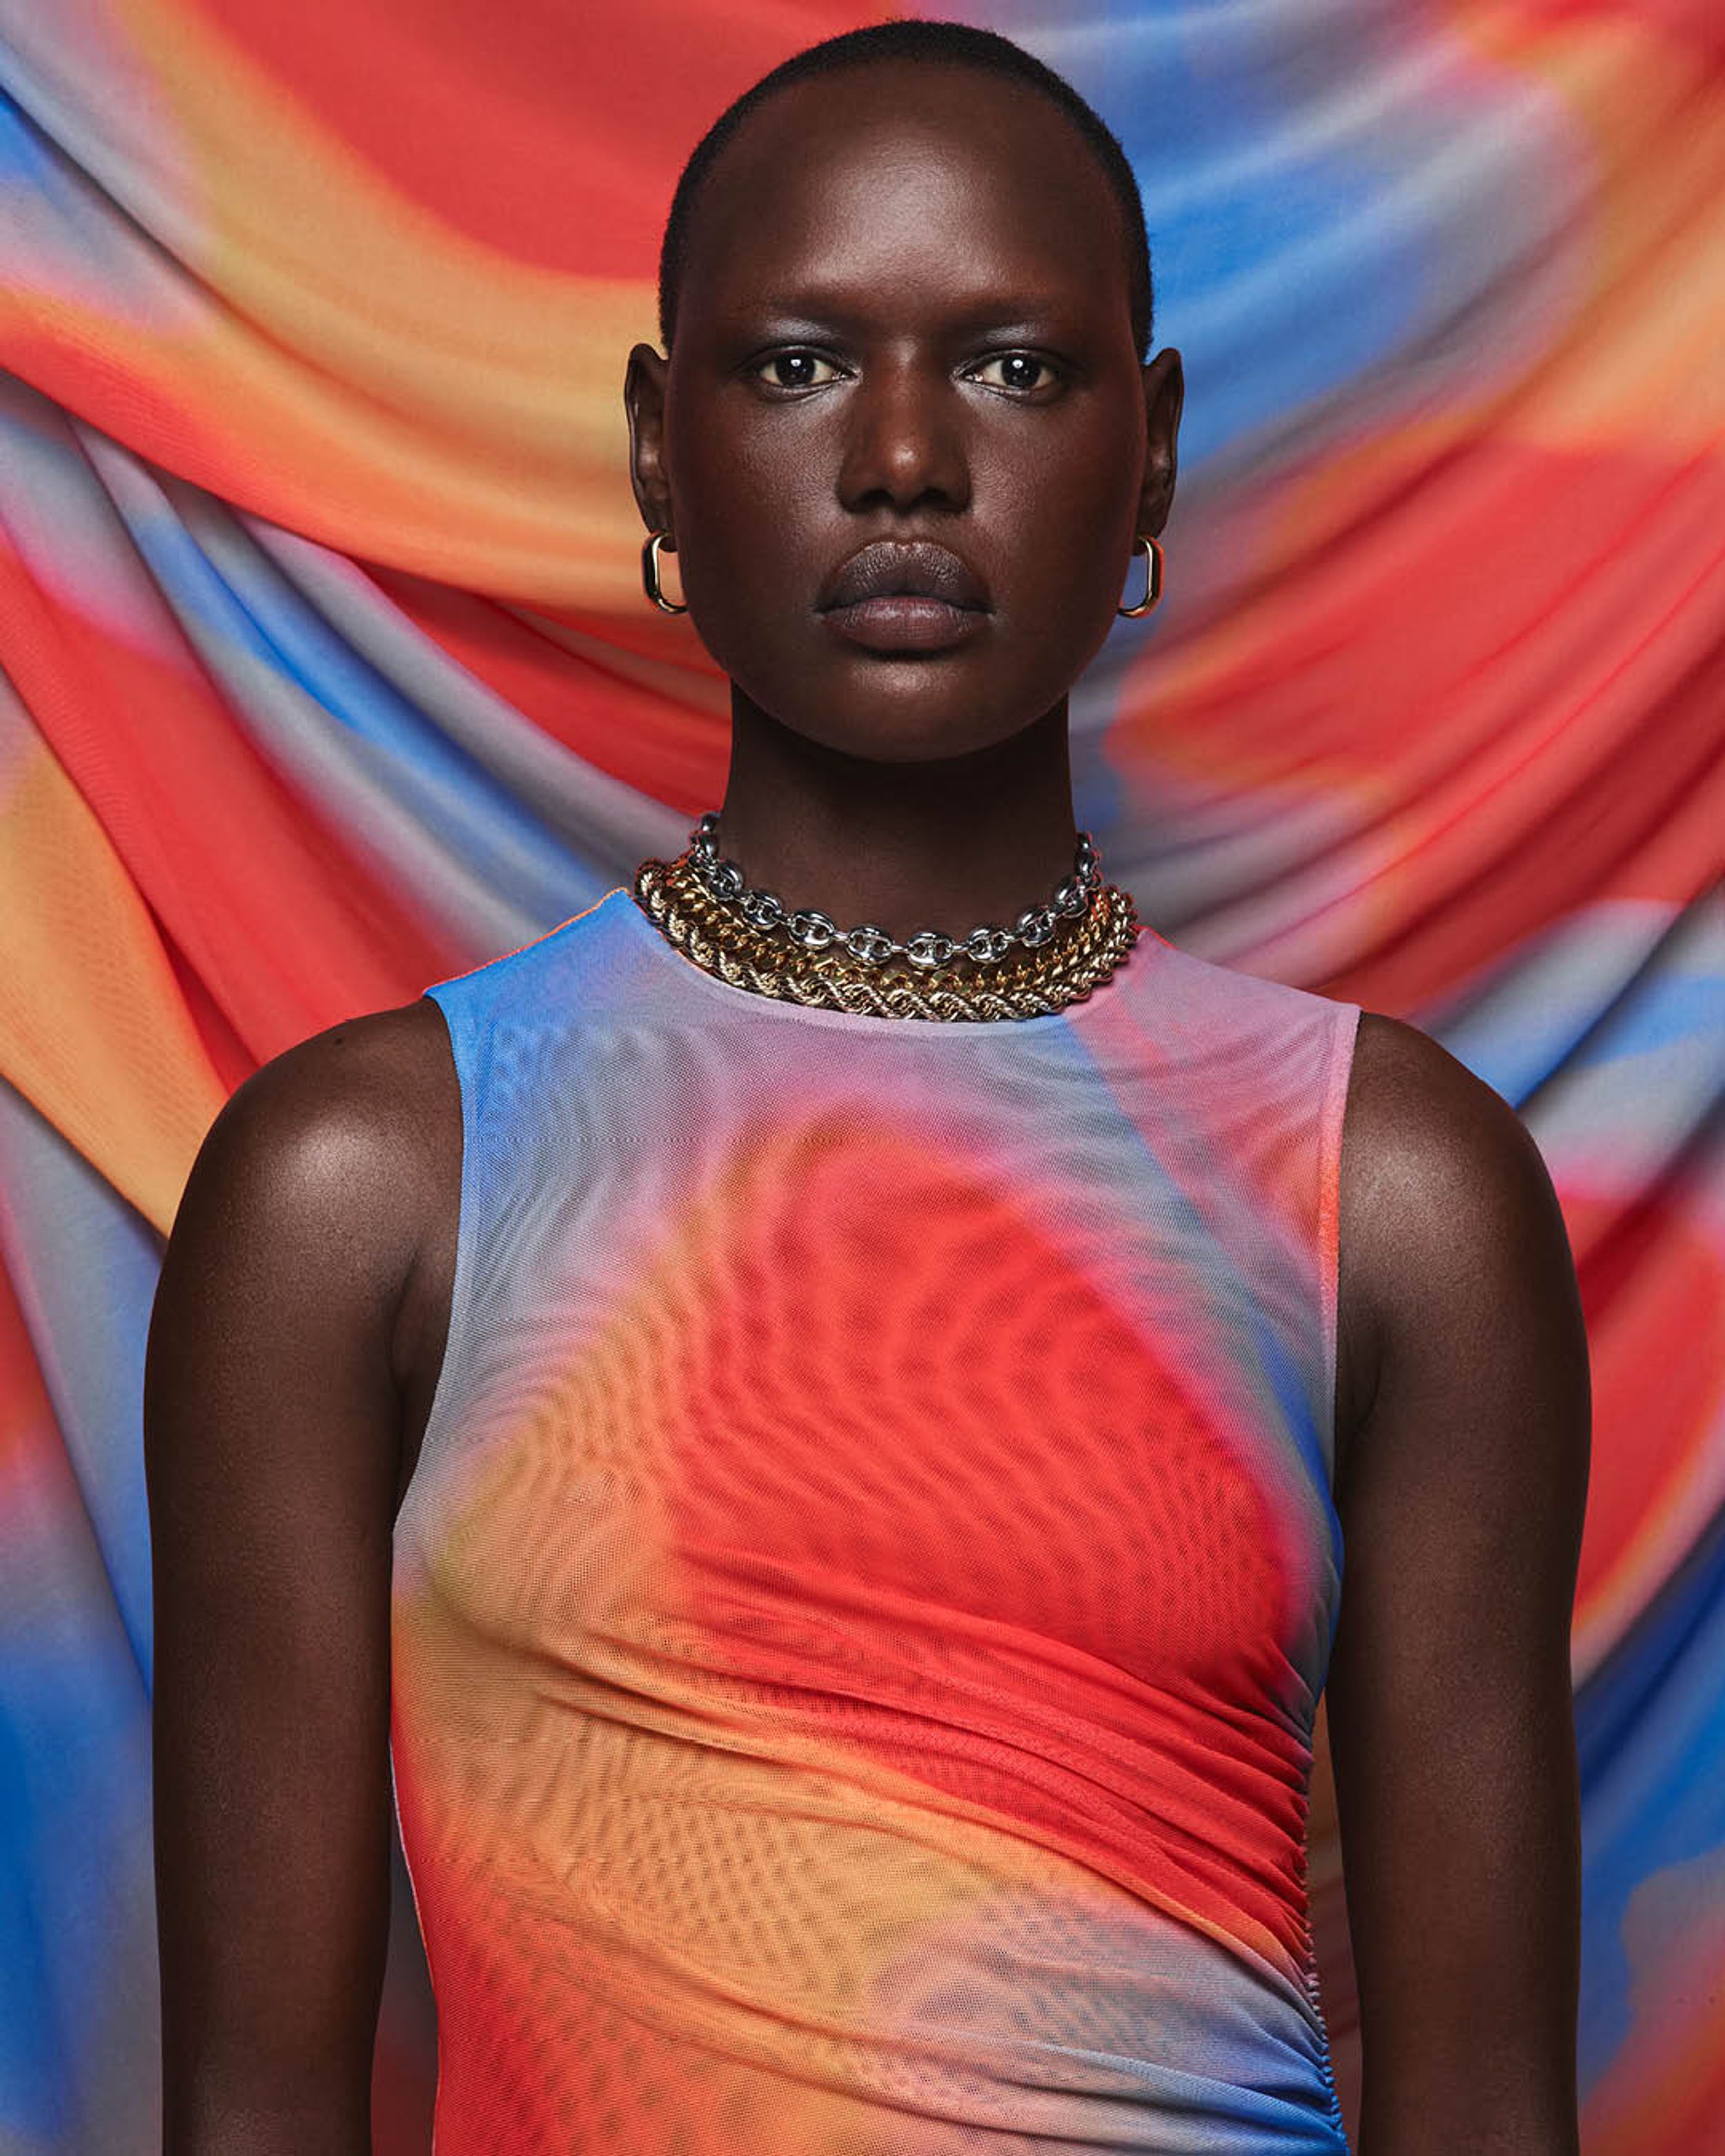 Ajak Deng wears a red, orange and blue mesh sleeveless dress standing in front of a backdrop with the same material